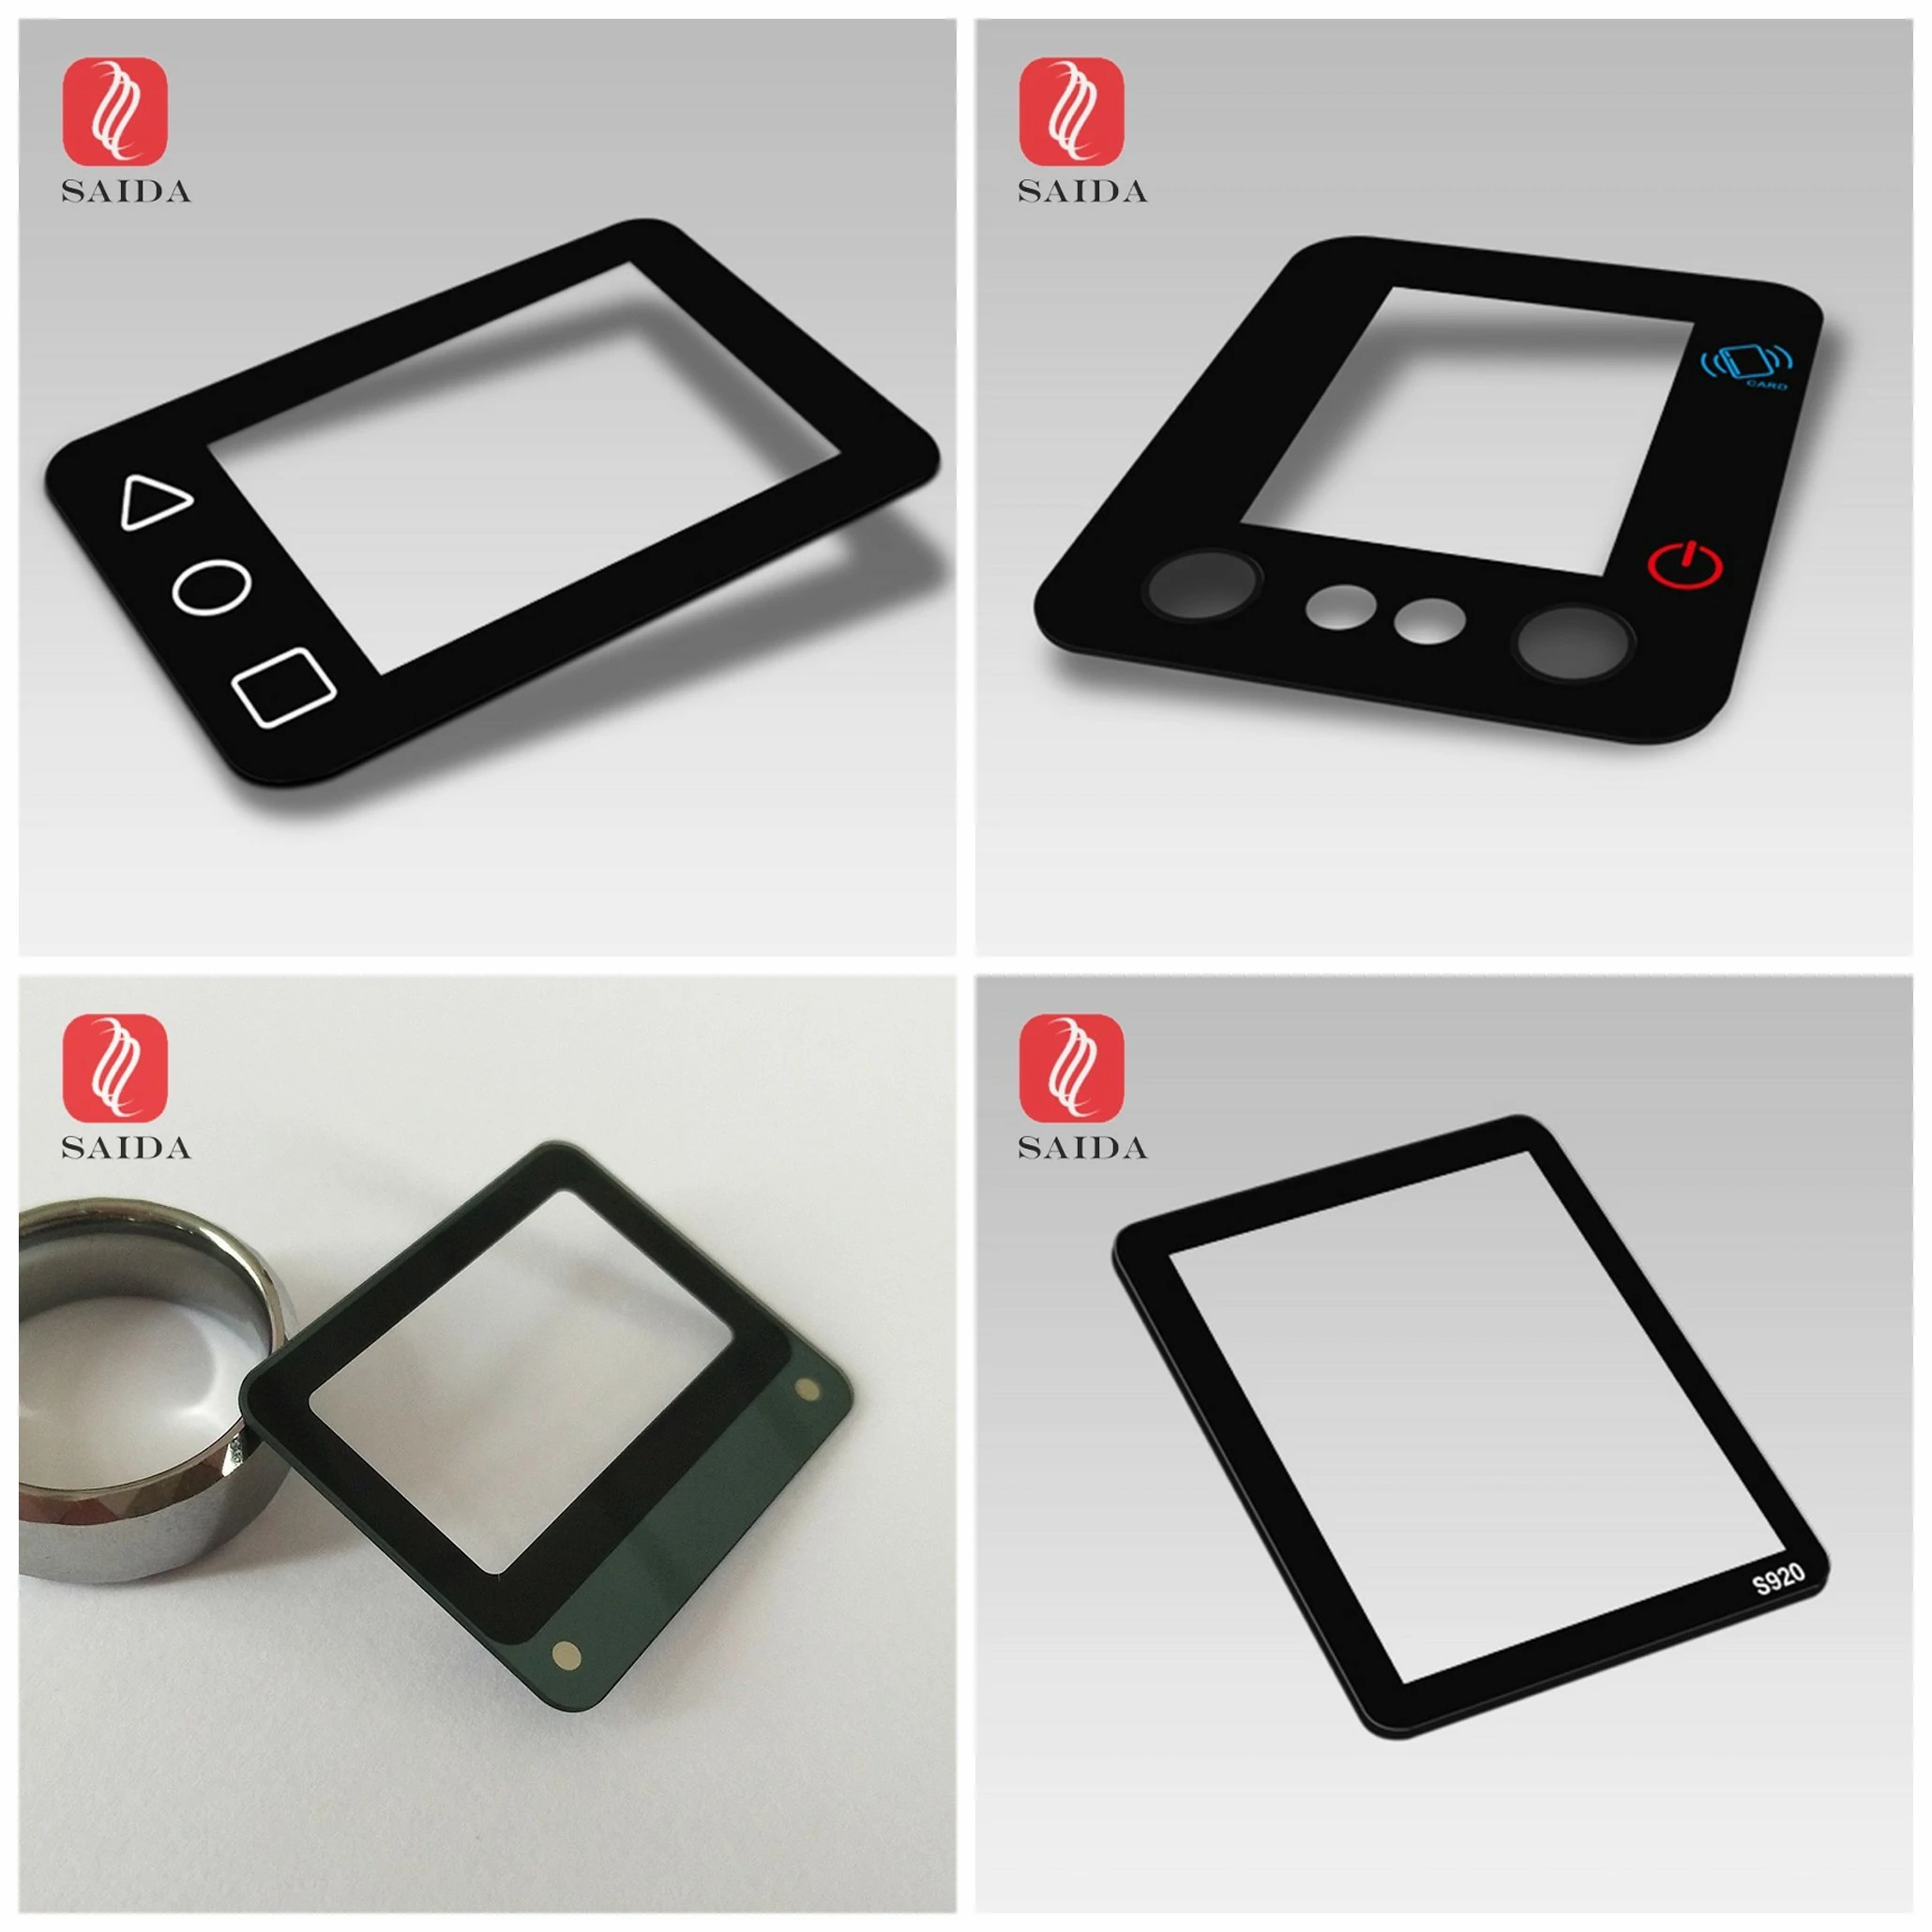 china glass factory OEM 5inch cover lens 0.7mm with 2.5d polished edges CNC processed for touch panel PC